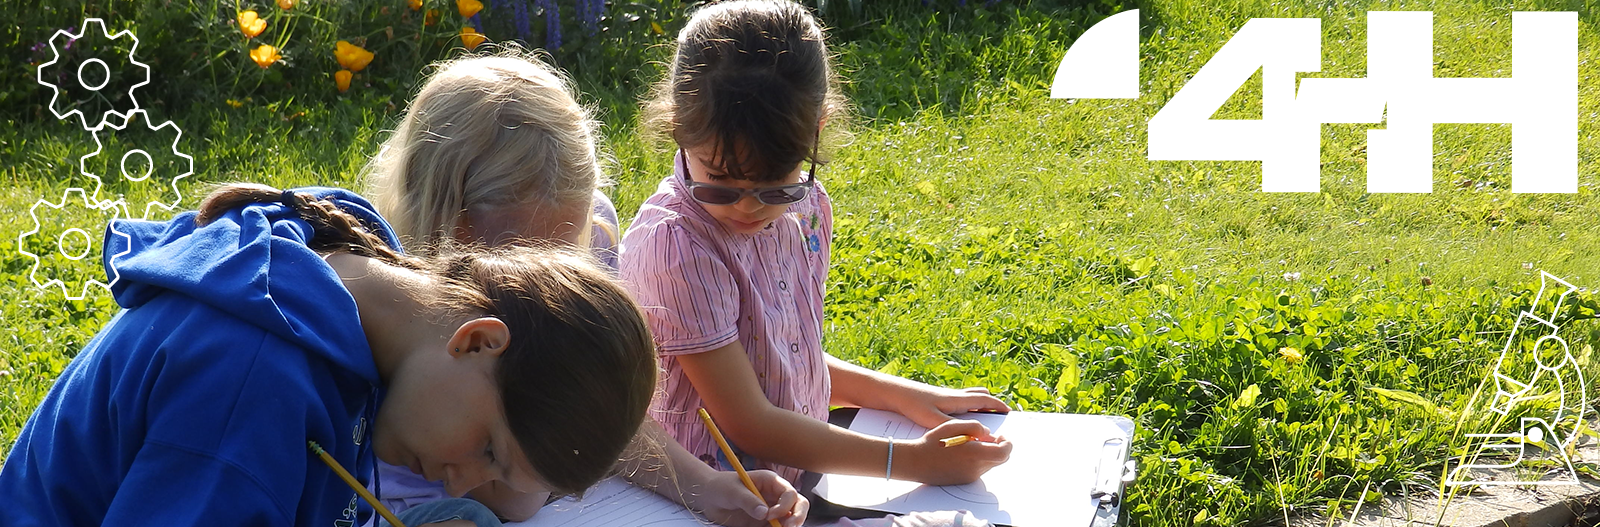 Children observing and making notes in a garden